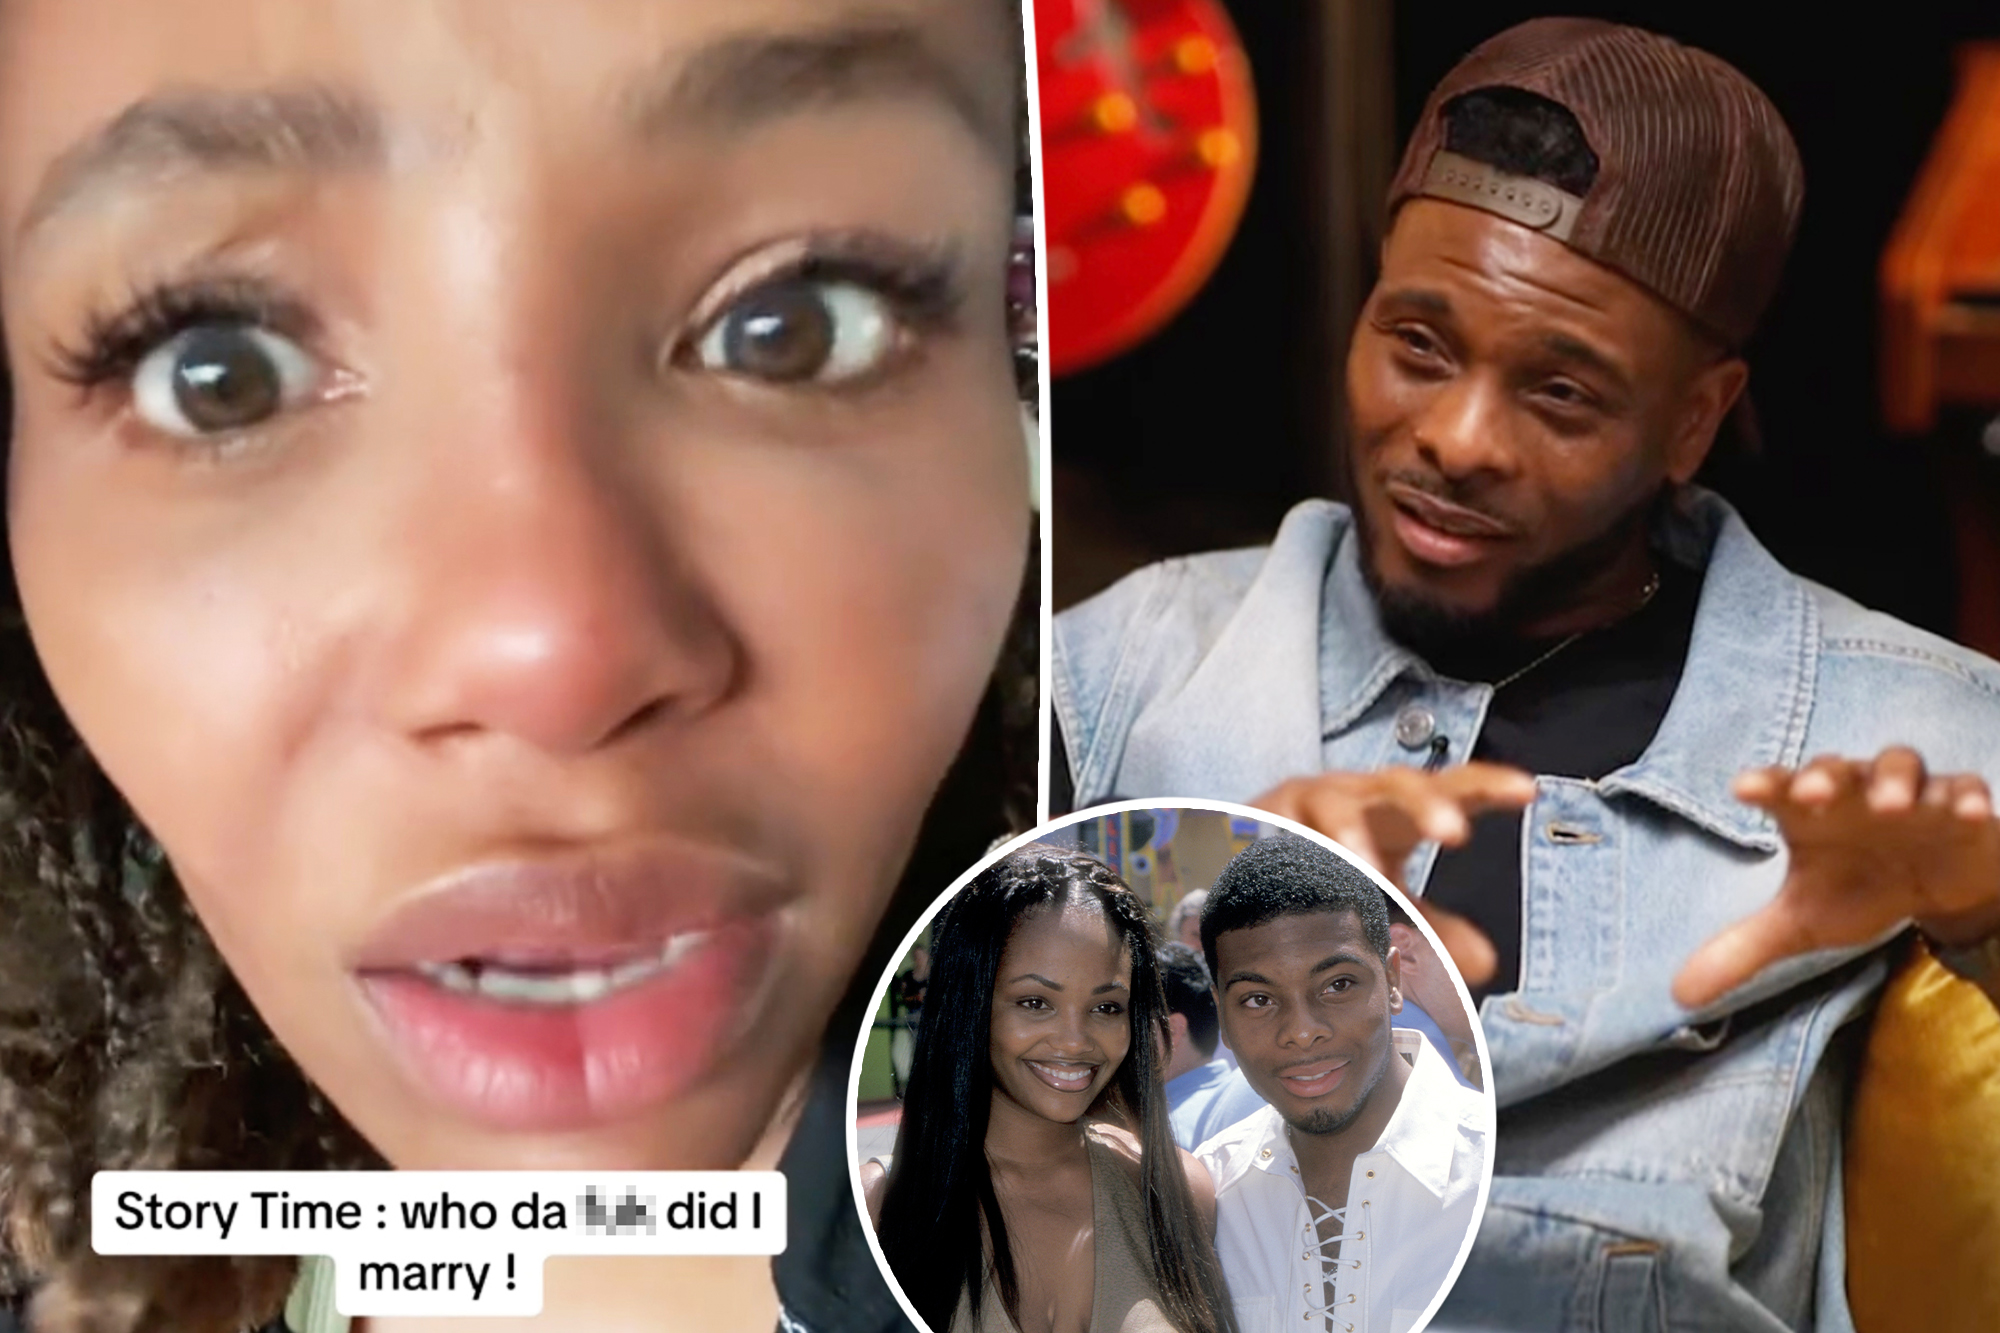 Kel Mitchell's Ex-Wife Sets the Record Straight on Marriage Claims